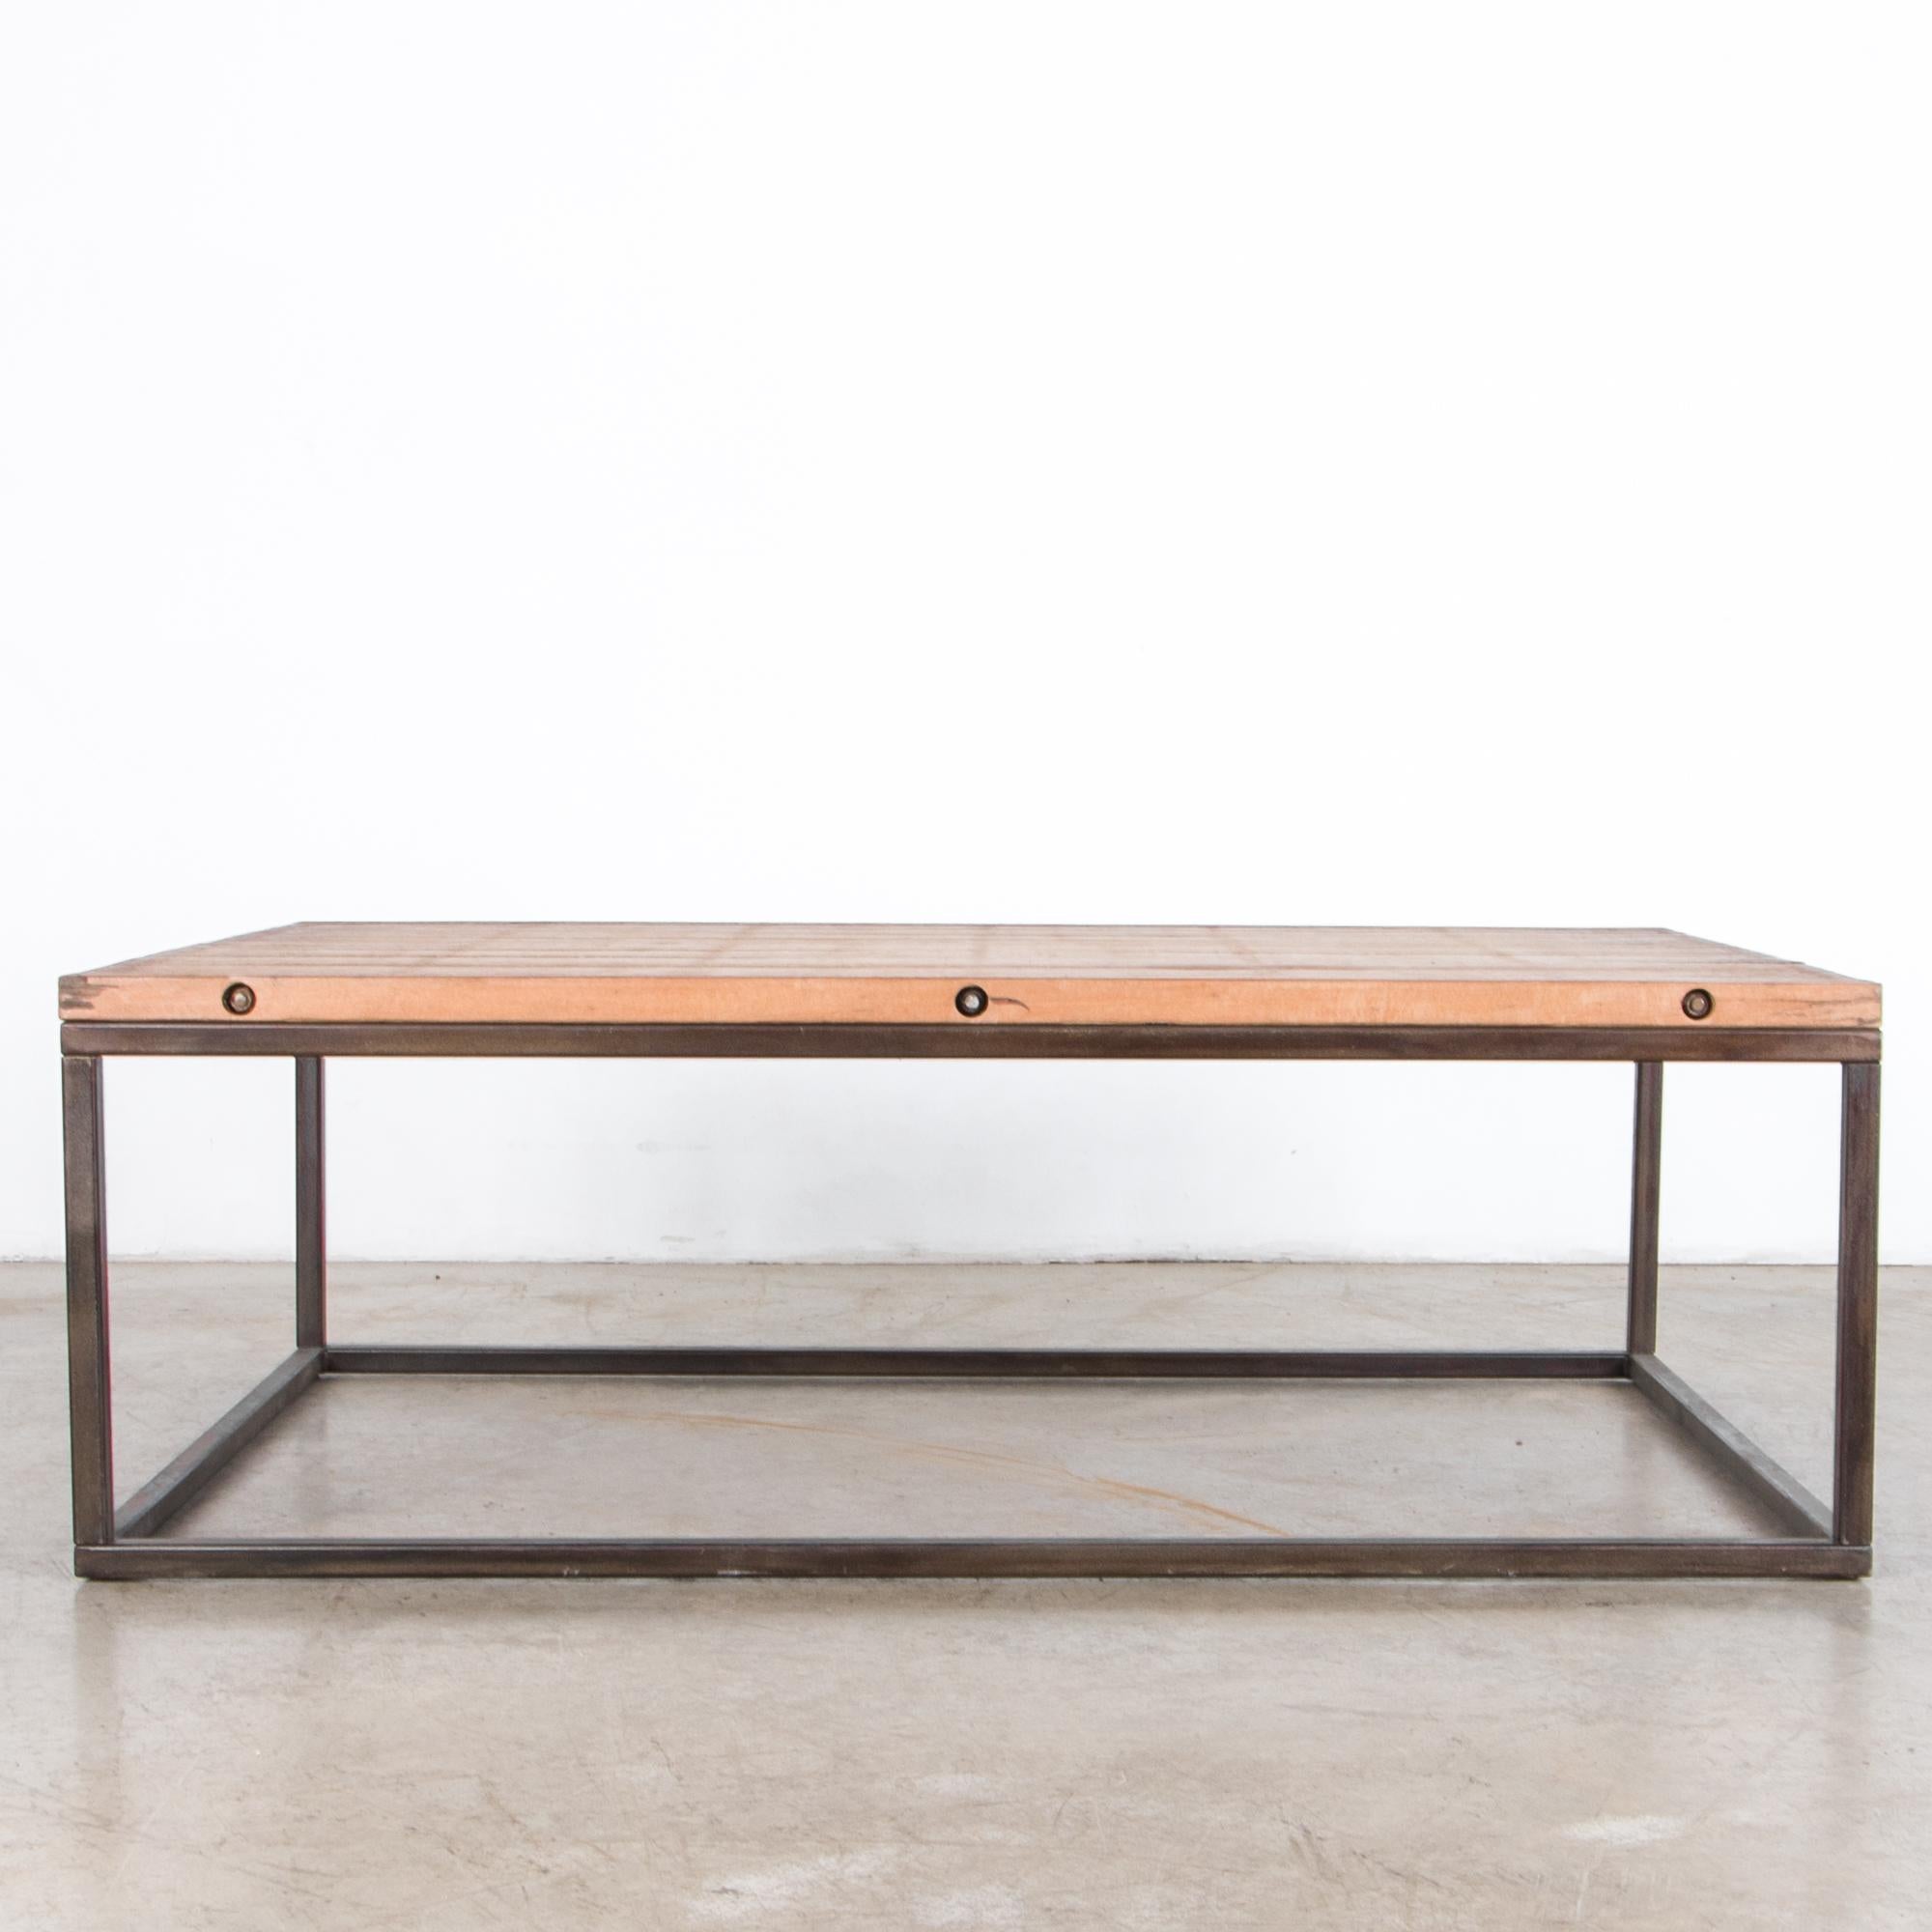 Constructed from sturdy azobé wood, reinforced with metal bars and a geometric steel base creates a minimalist suggestion of stability. Blending sleek and rustic, this 17” tall coffee table makes a comfortable and stylish place to rest your drink.